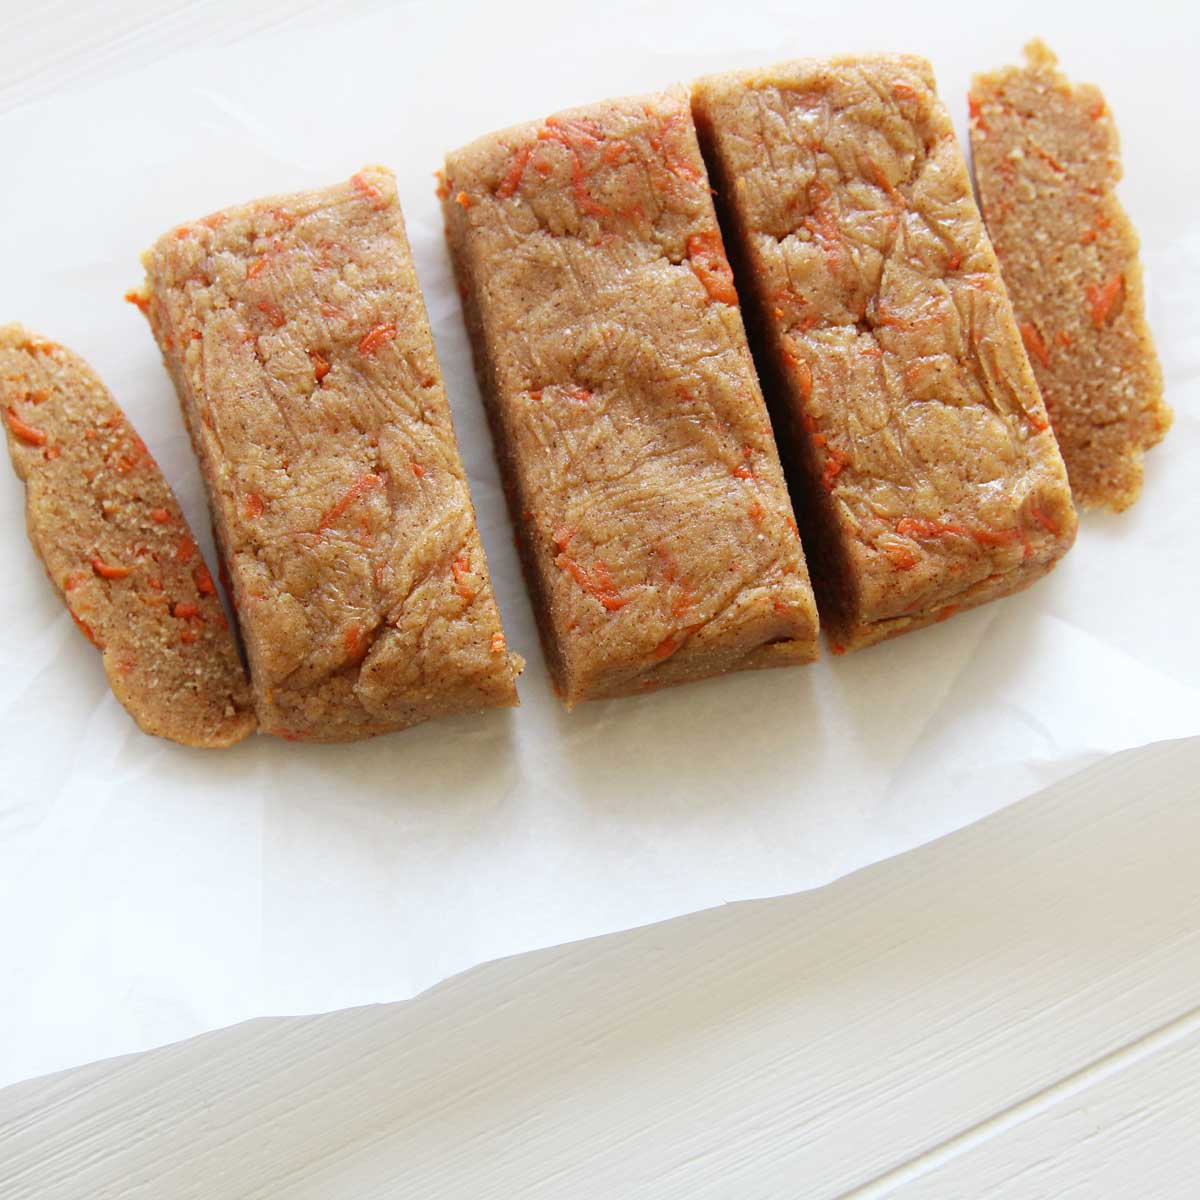 No-Bake Carrot Cake Protein Bars Recipe with Collagen Peptides - Carrot Cake Protein Bars